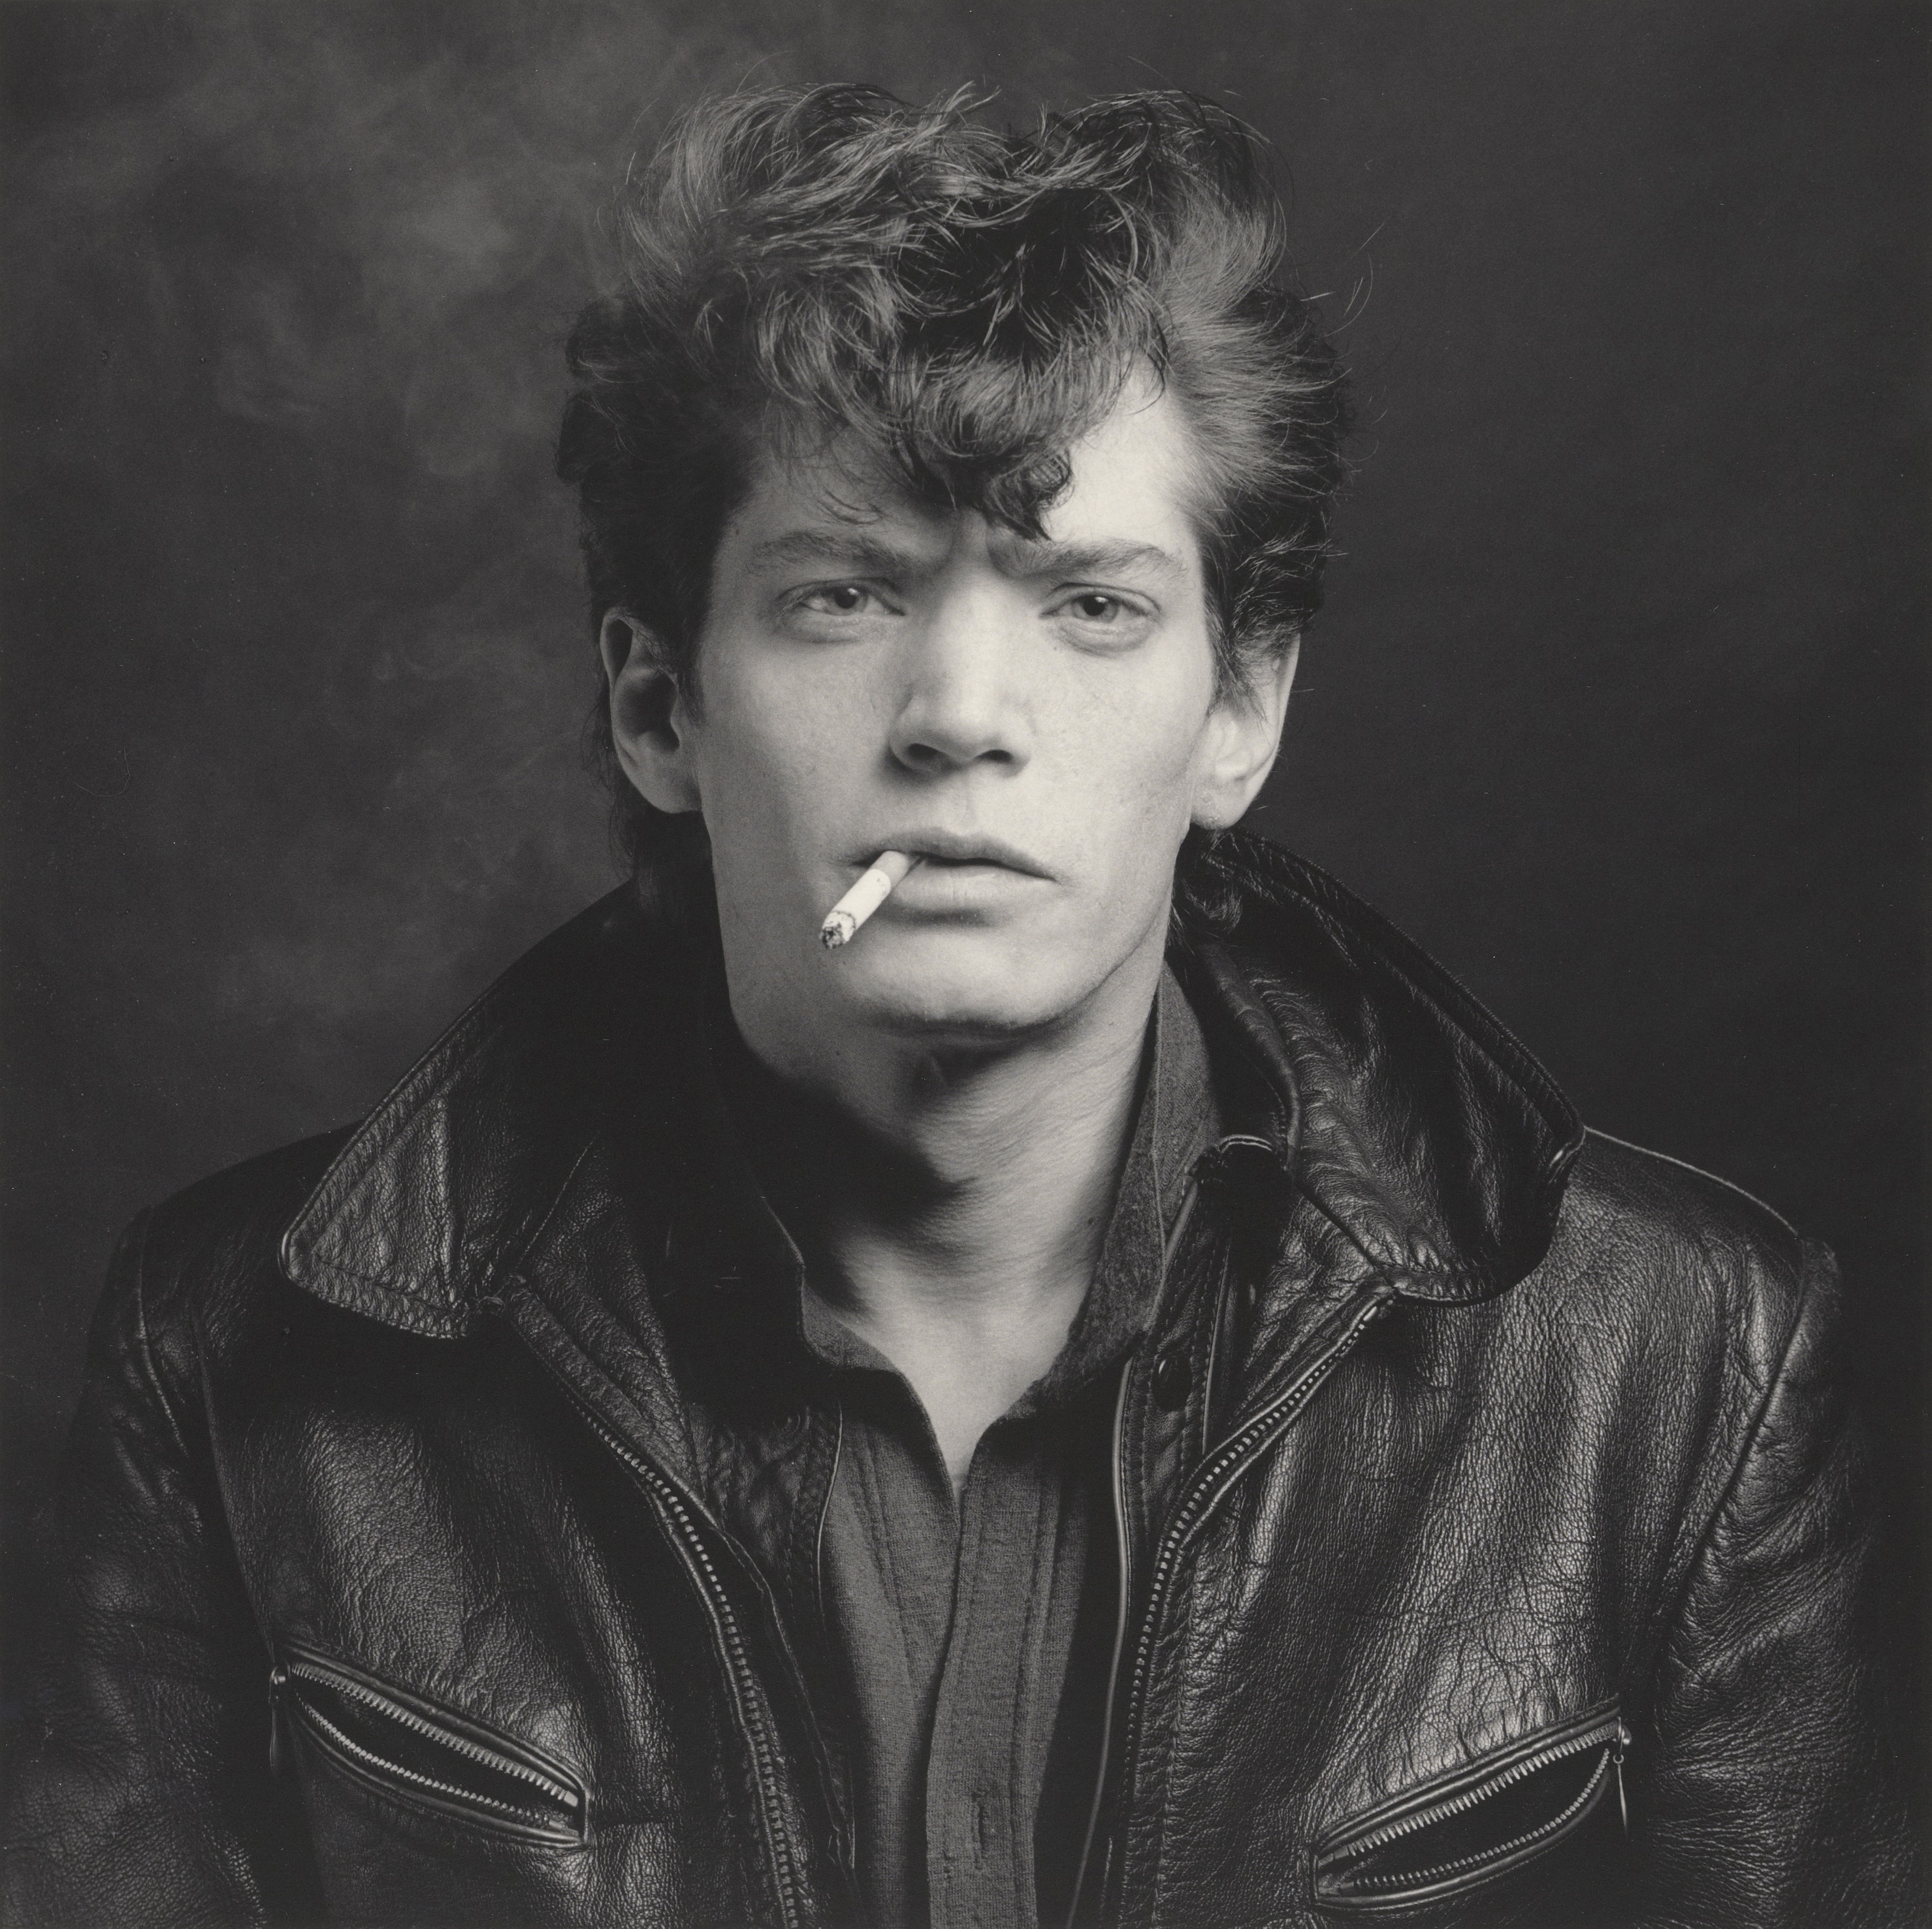 Black and white square format photograph of Robert Mapplethorpe smoking a cigarette in front of a studio background.